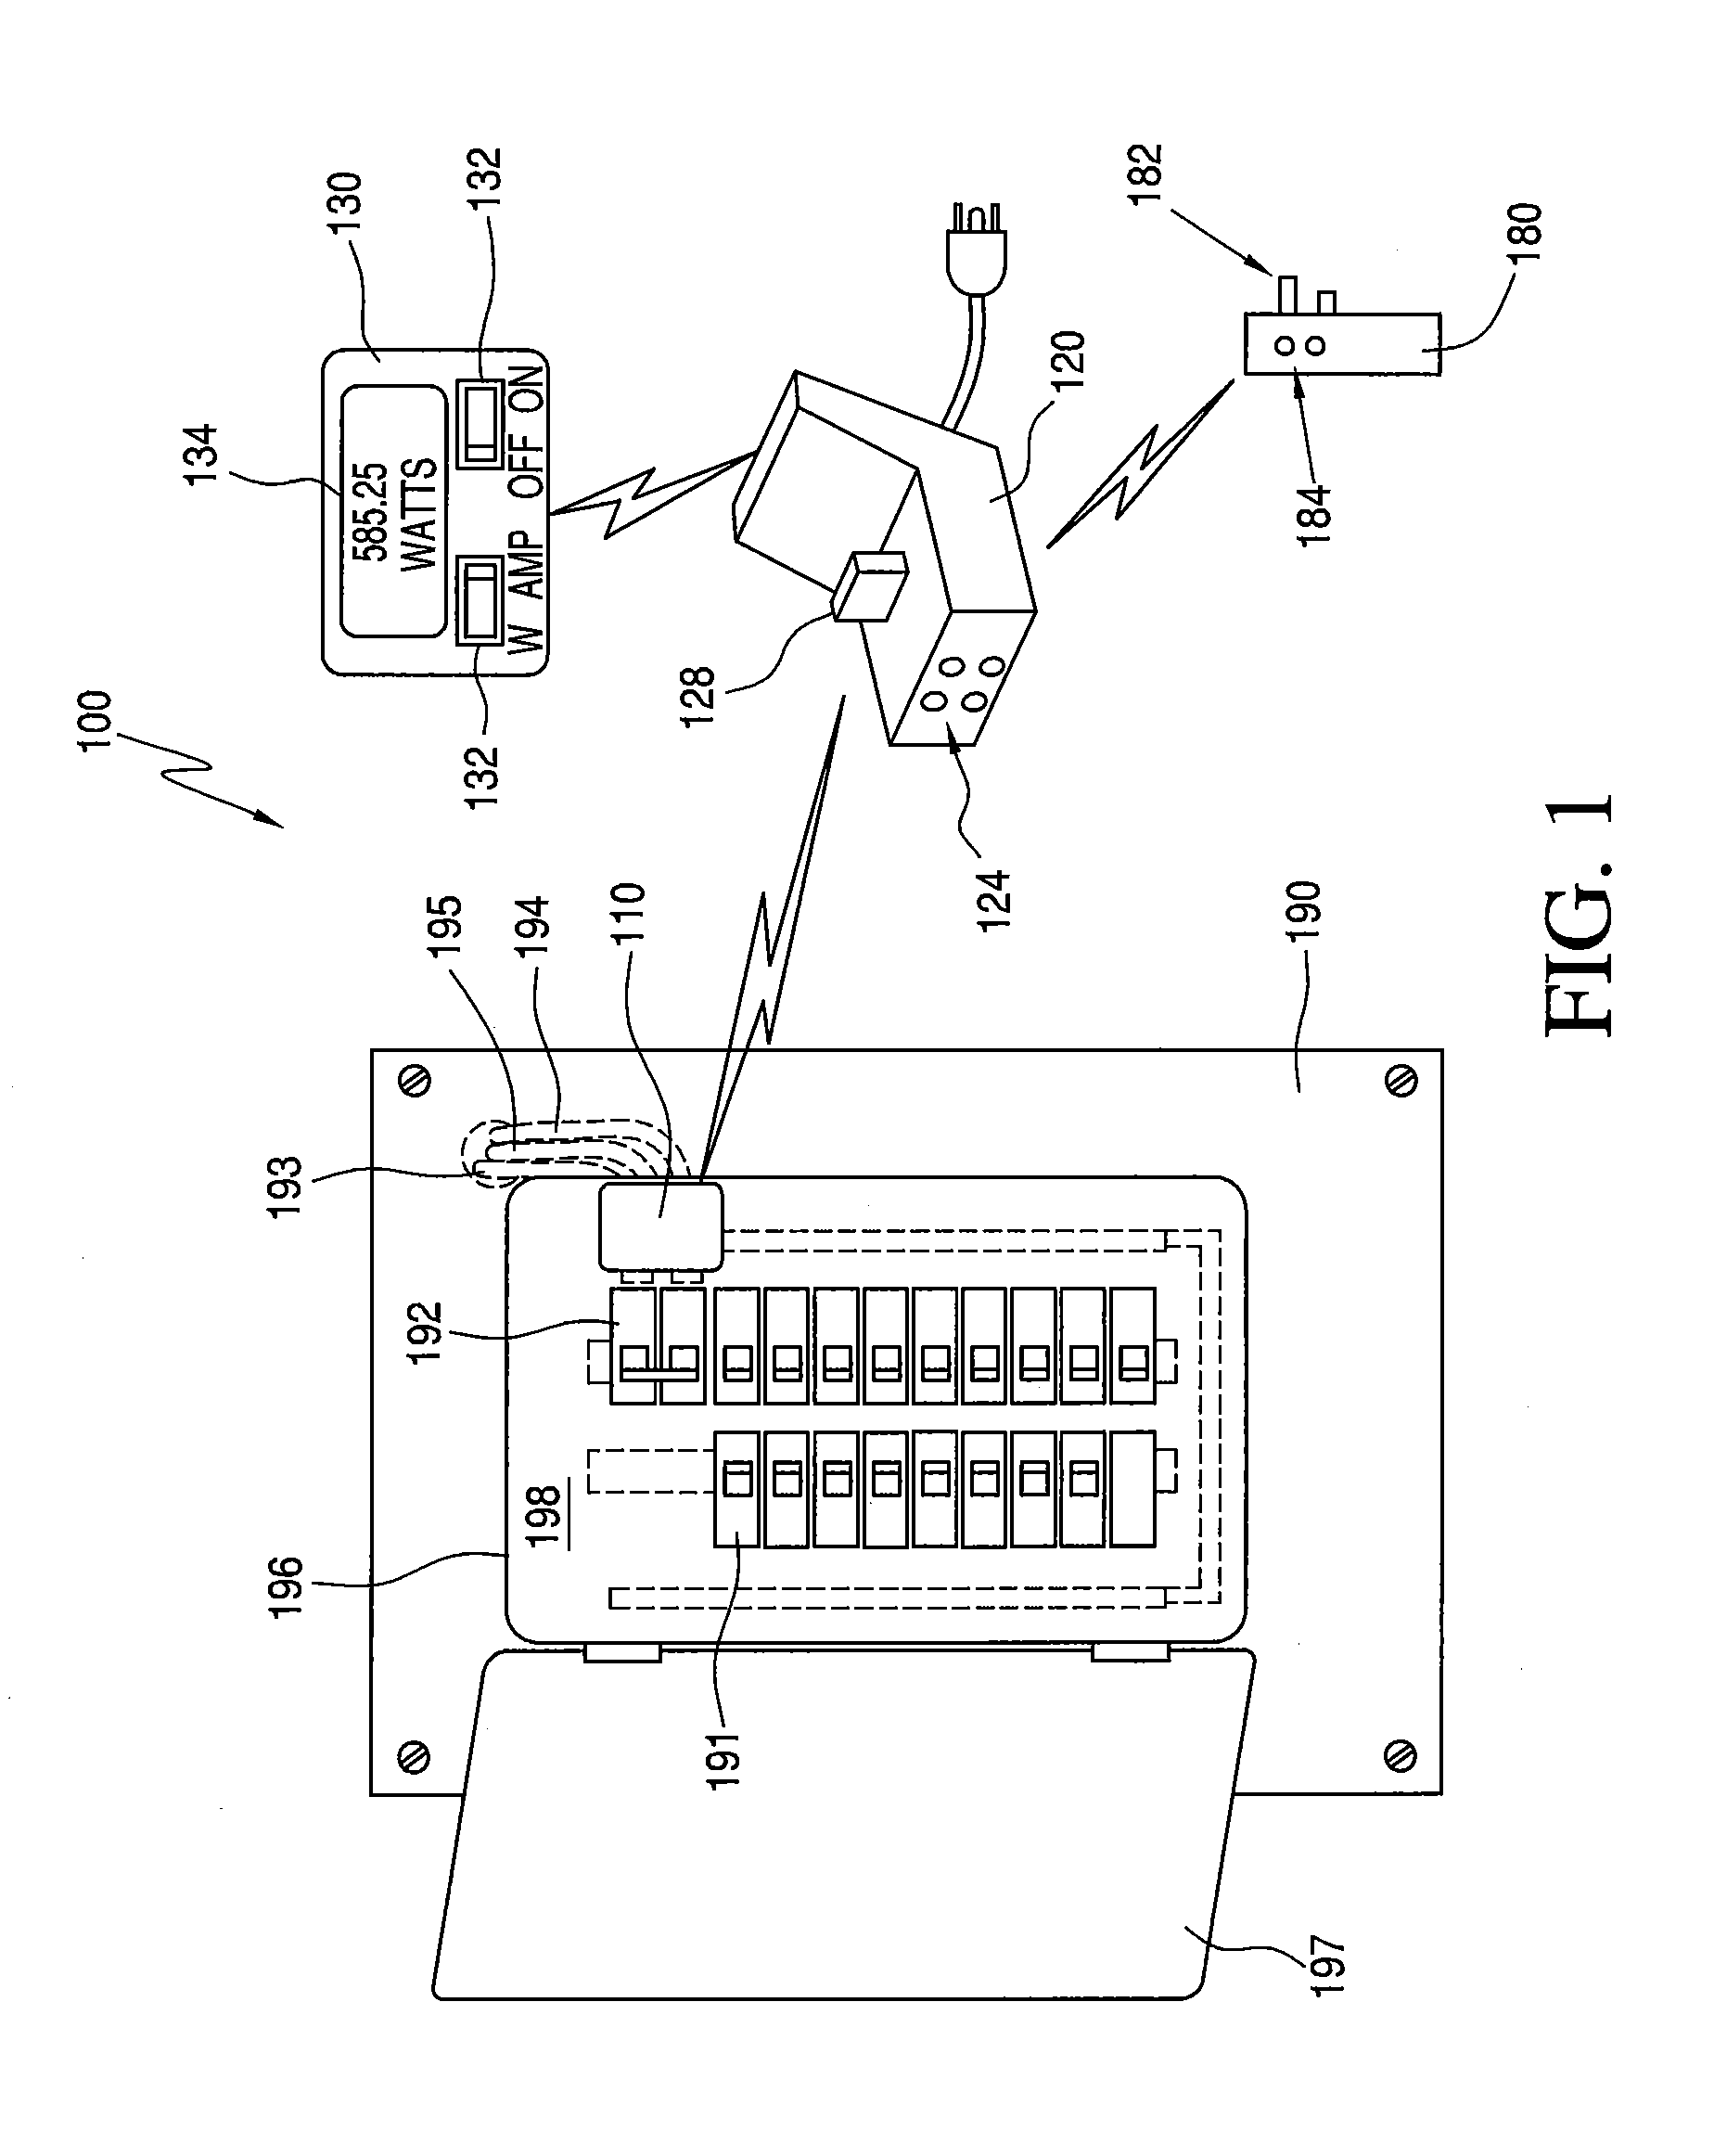 System and method for monitoring electrical power usage in an electrical power infrastructure of a building